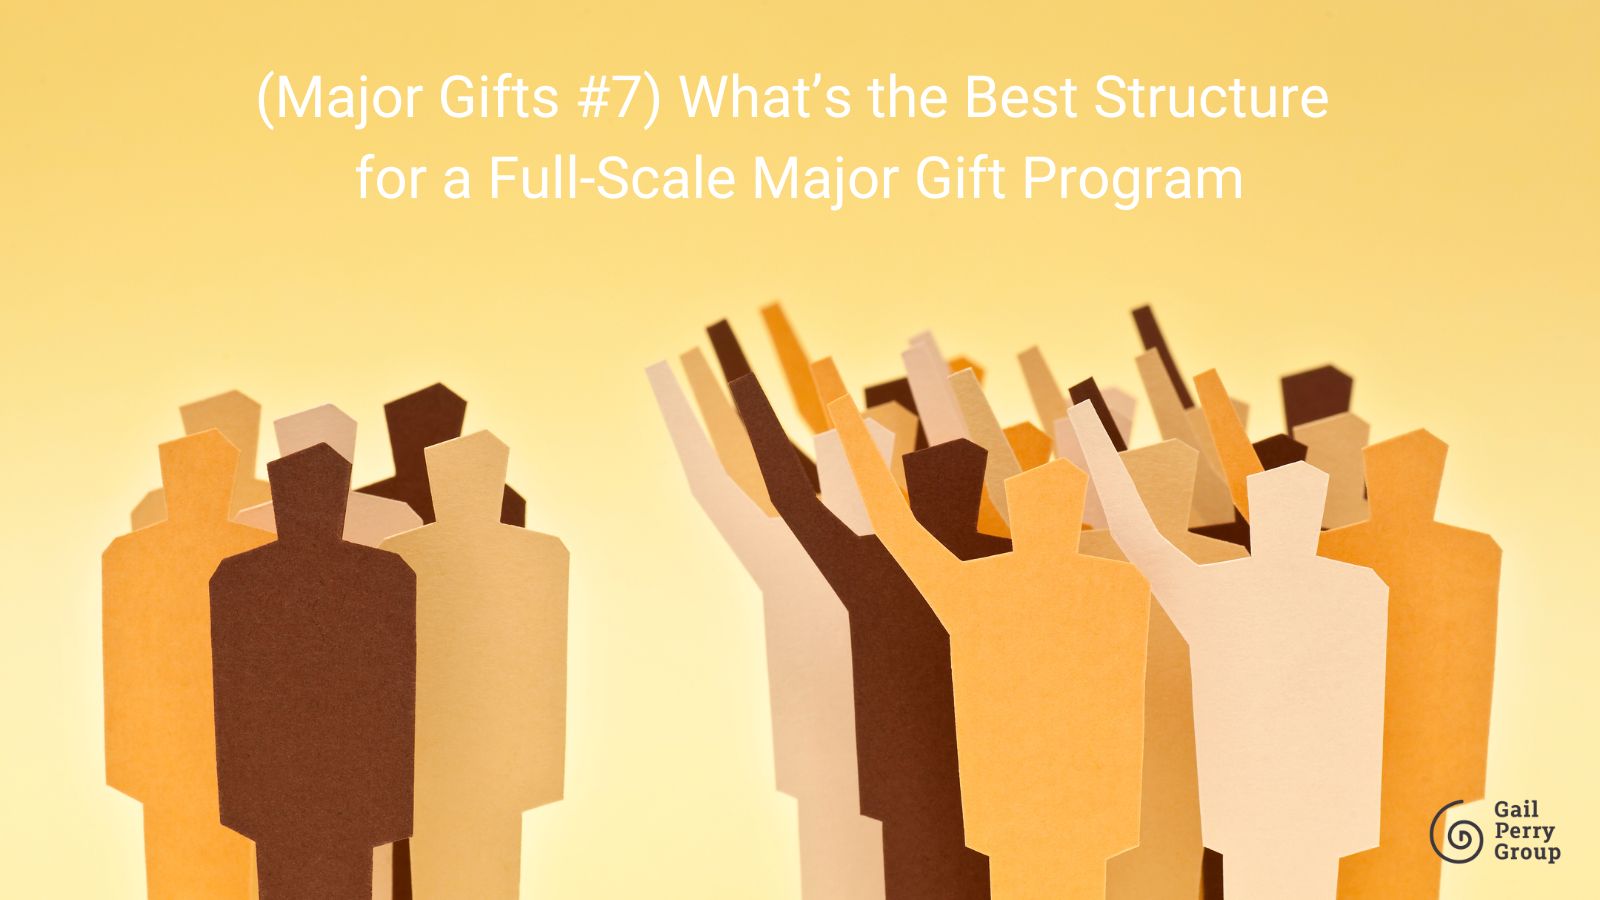 DONATE: (Major Gifts #7) What’s the Best Structure for a Full-Scale Major Gift Program